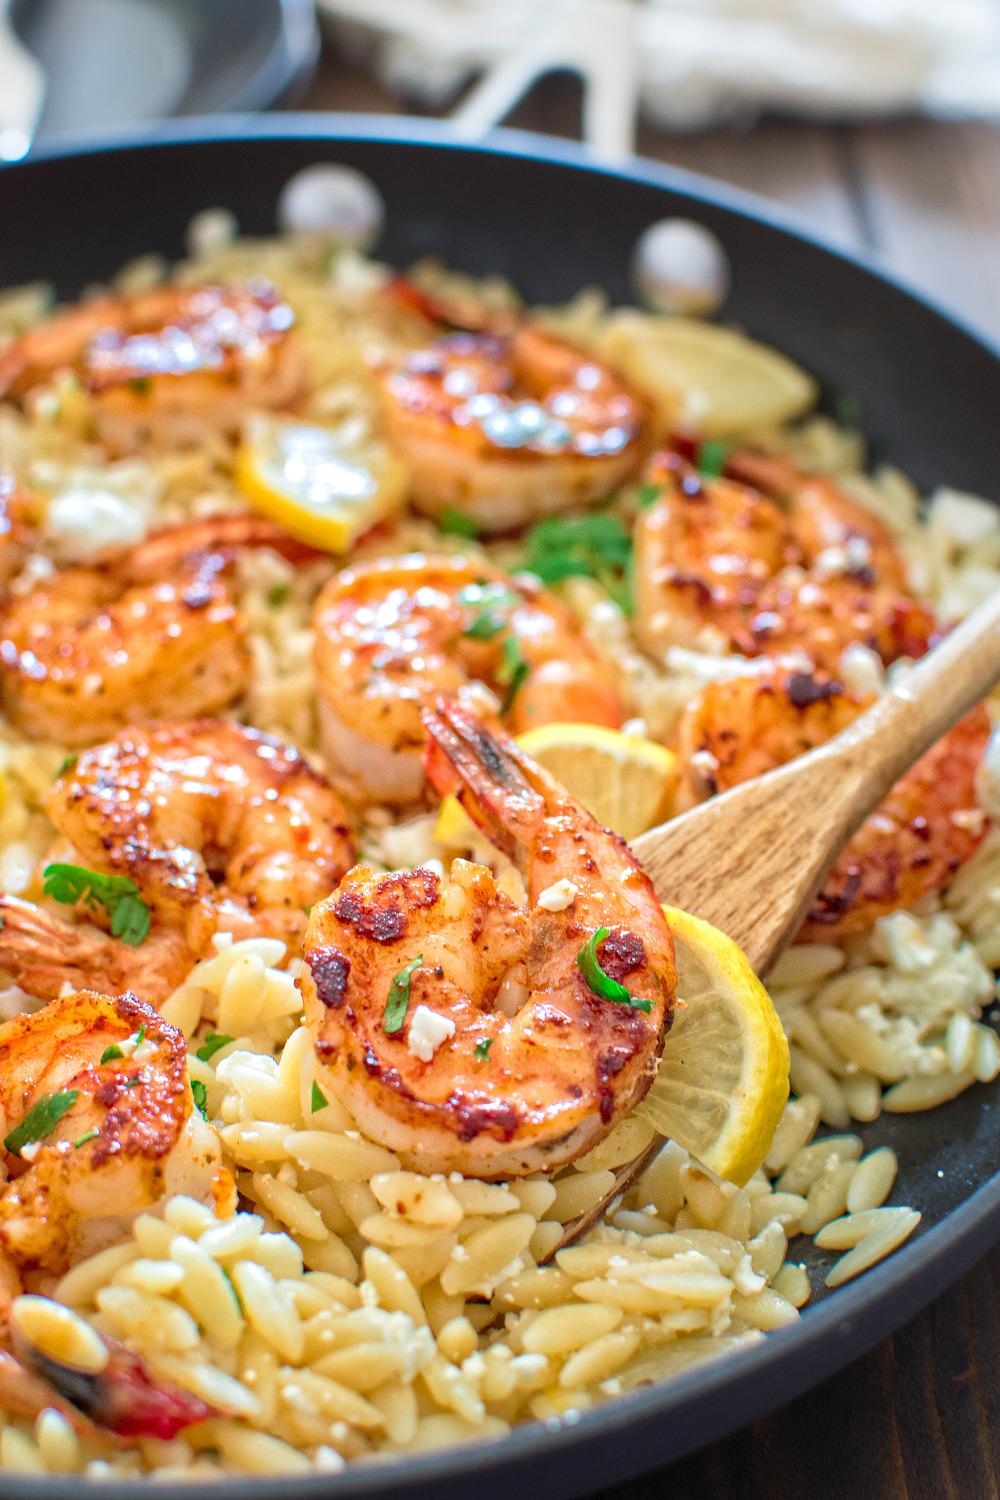 ORZO WITH SHRIMP AND FETA Cook Time - 15 mins Total Time - 25 mins 1 cup uncooked orzo pasta 12 jumbo shrimps, peeled and deveined 1 tsp Old Bay Seasoning 2 tbsp butter 1/2 cup good quality feta